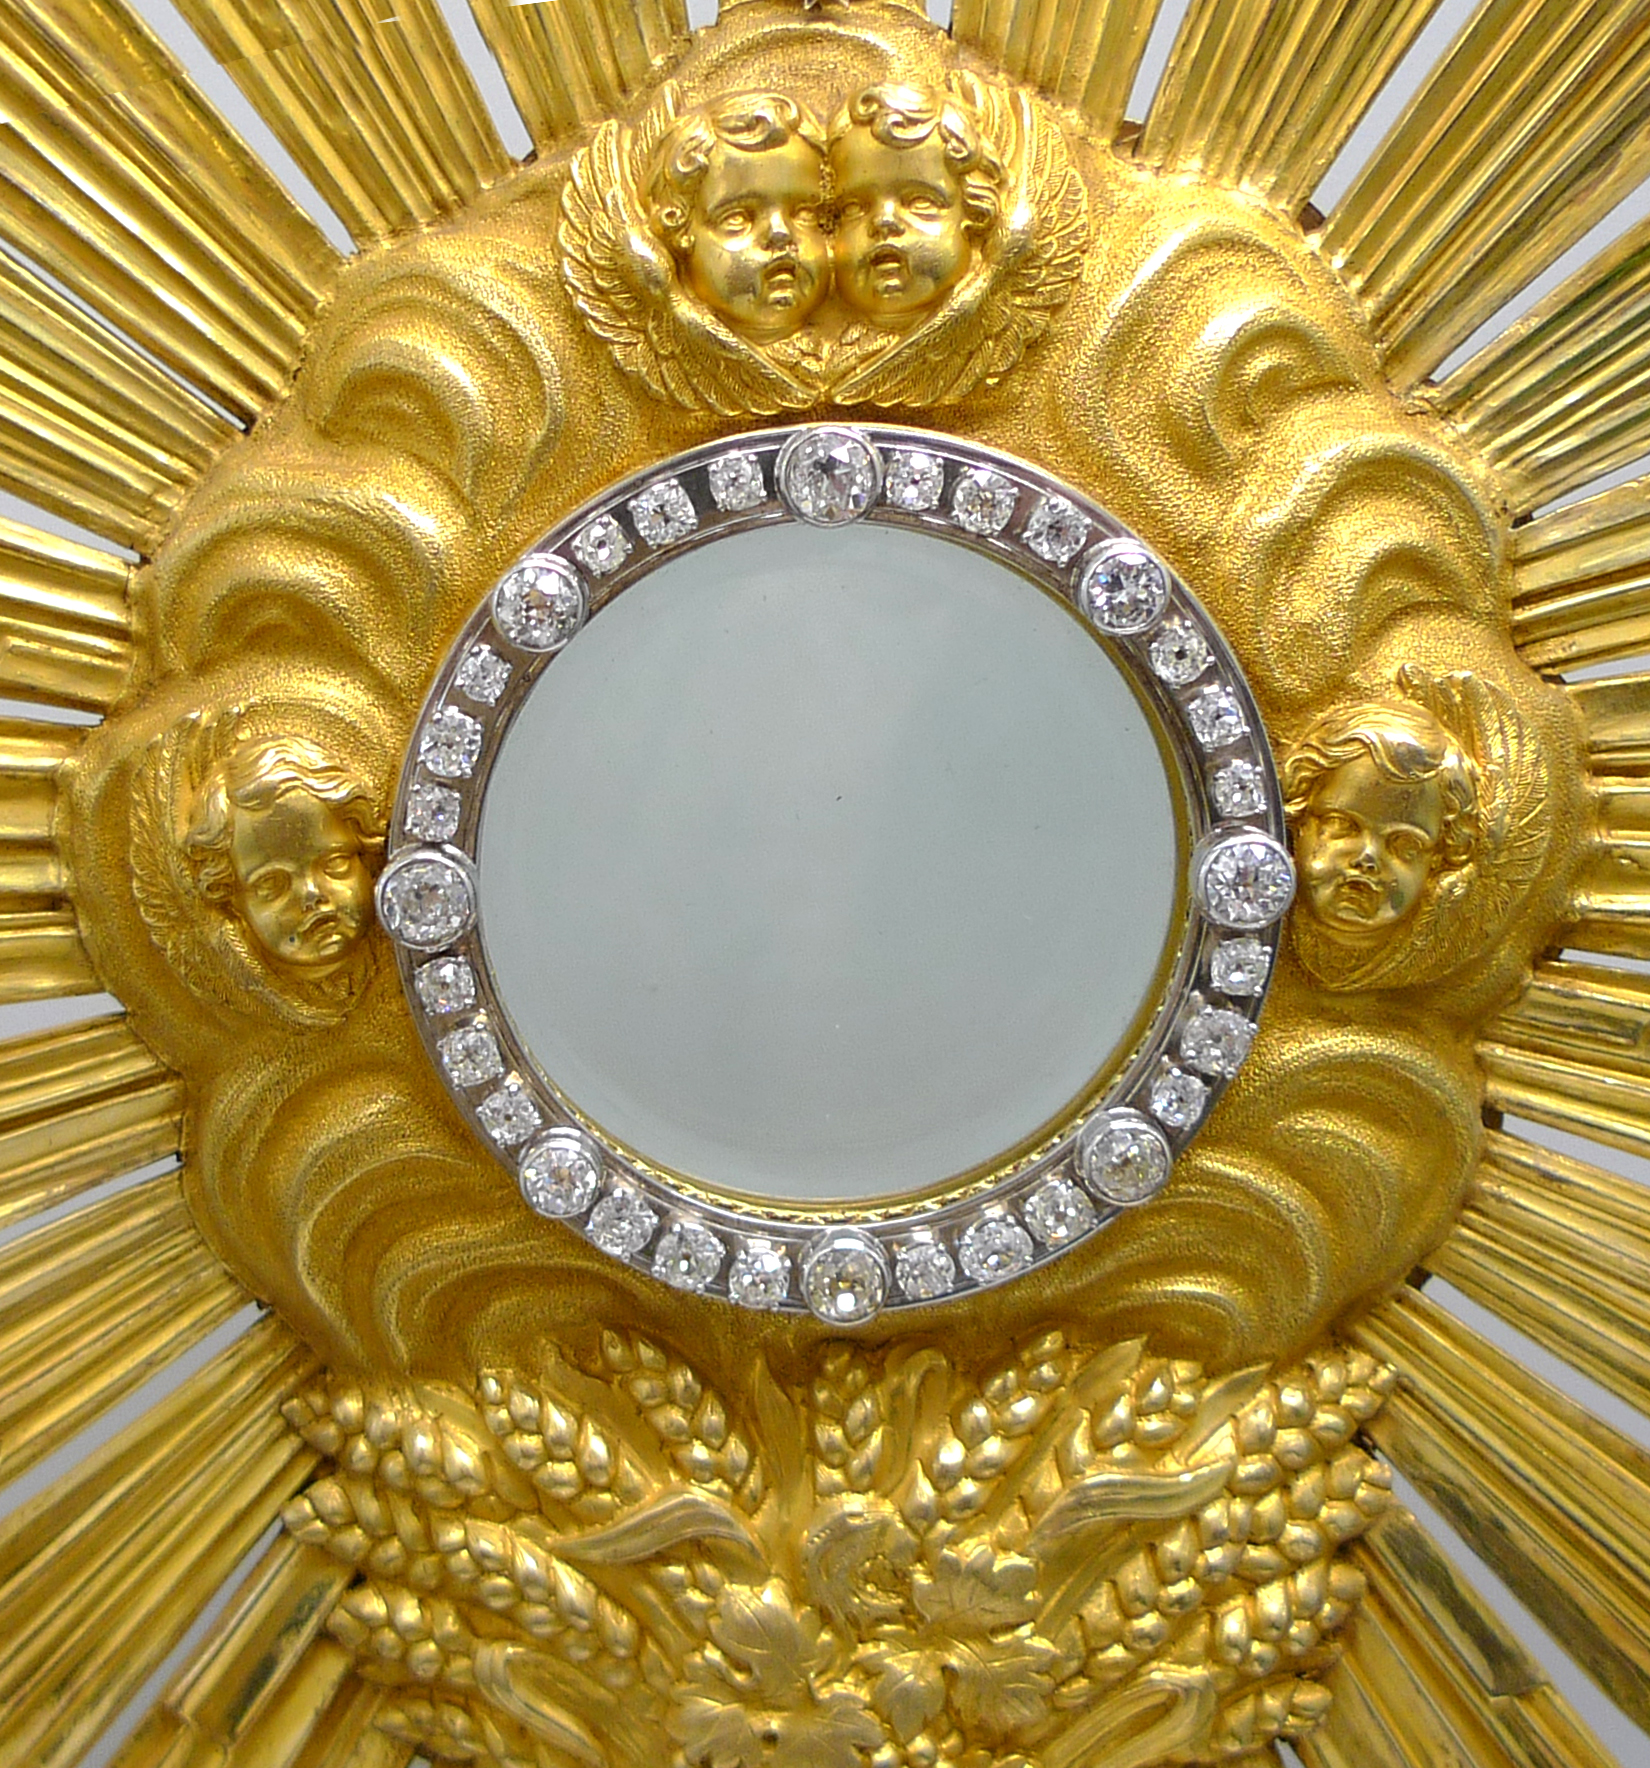 Picture ofOther Sacristy Items